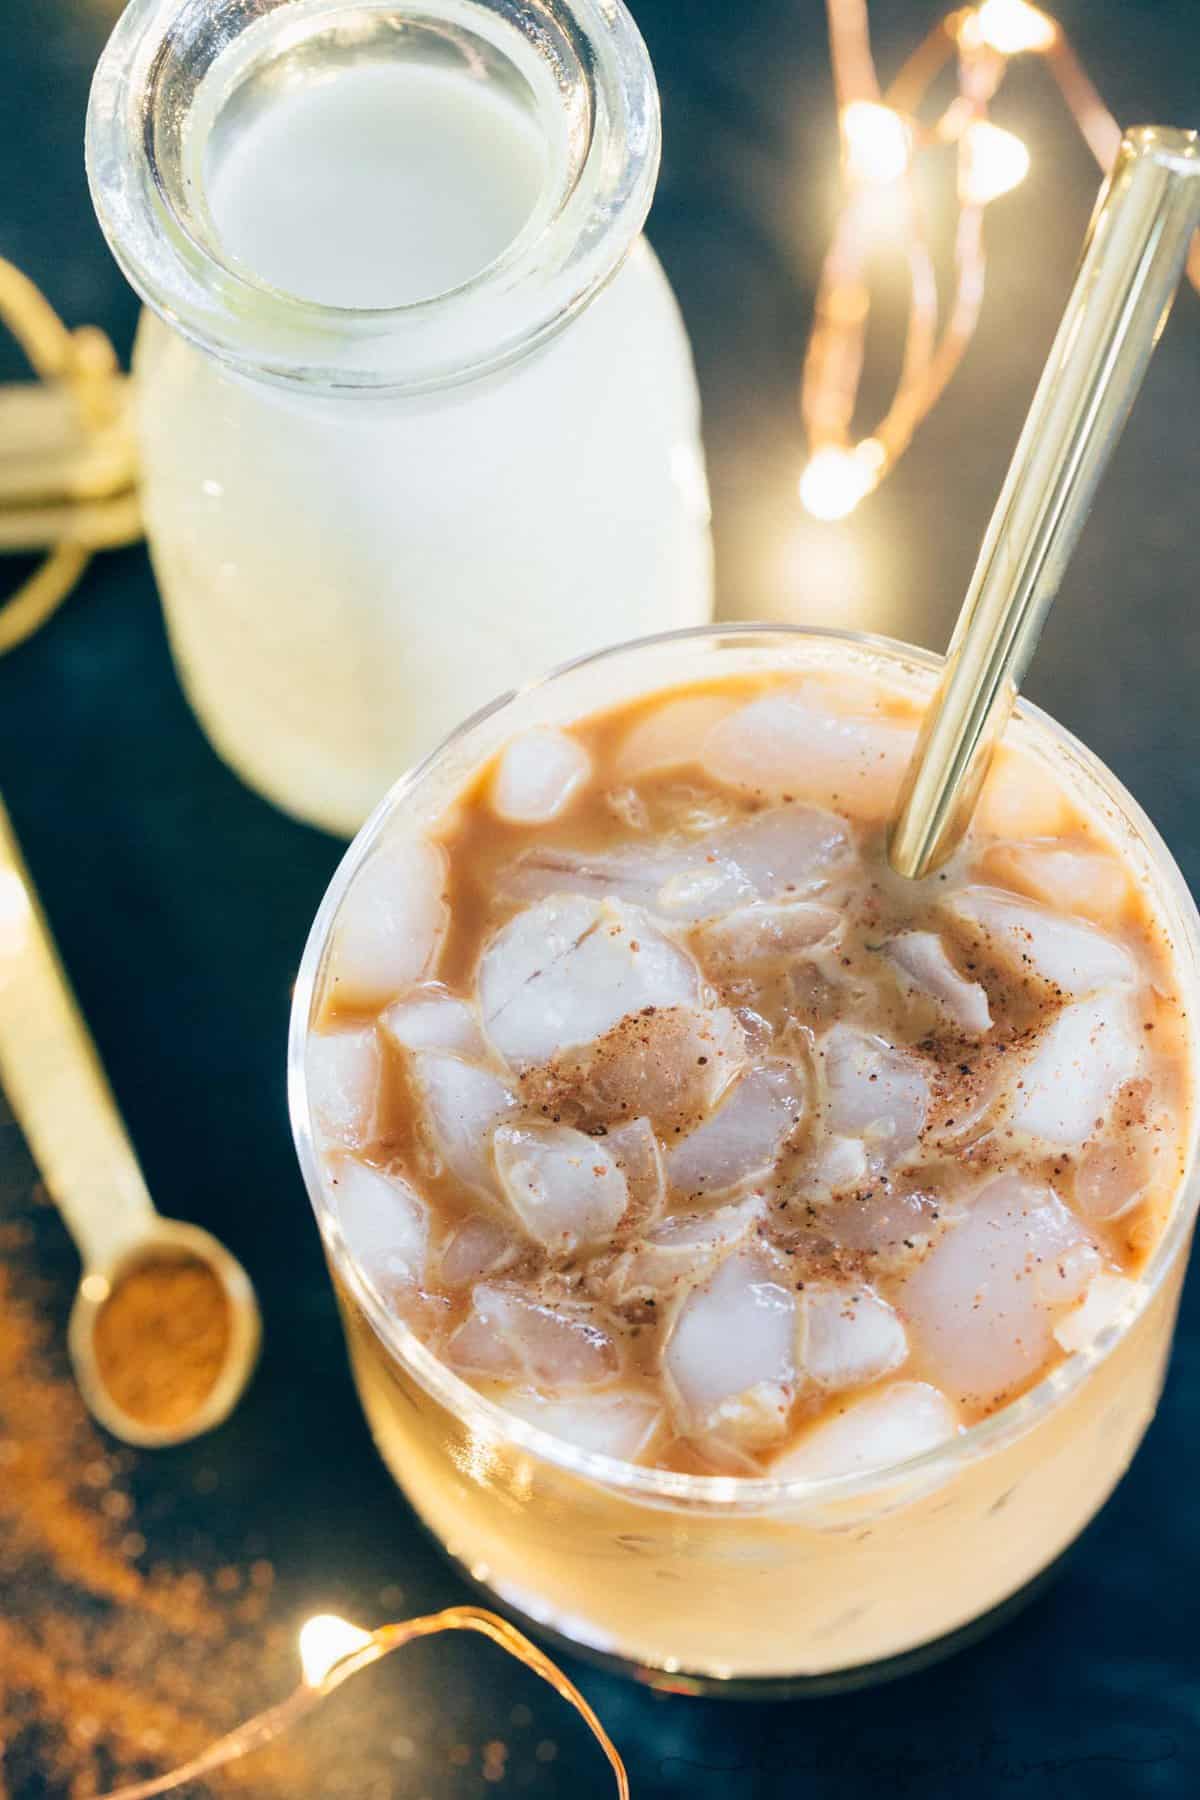 Need some pep in your step during the holidays? This iced eggnog latte is a festive and fun drink that will help with your energy levels throughout the day! Sip on this around the Christmas tree or in front of the fireplace. Anywhere you choose, it is sure to be creamy and delicious!